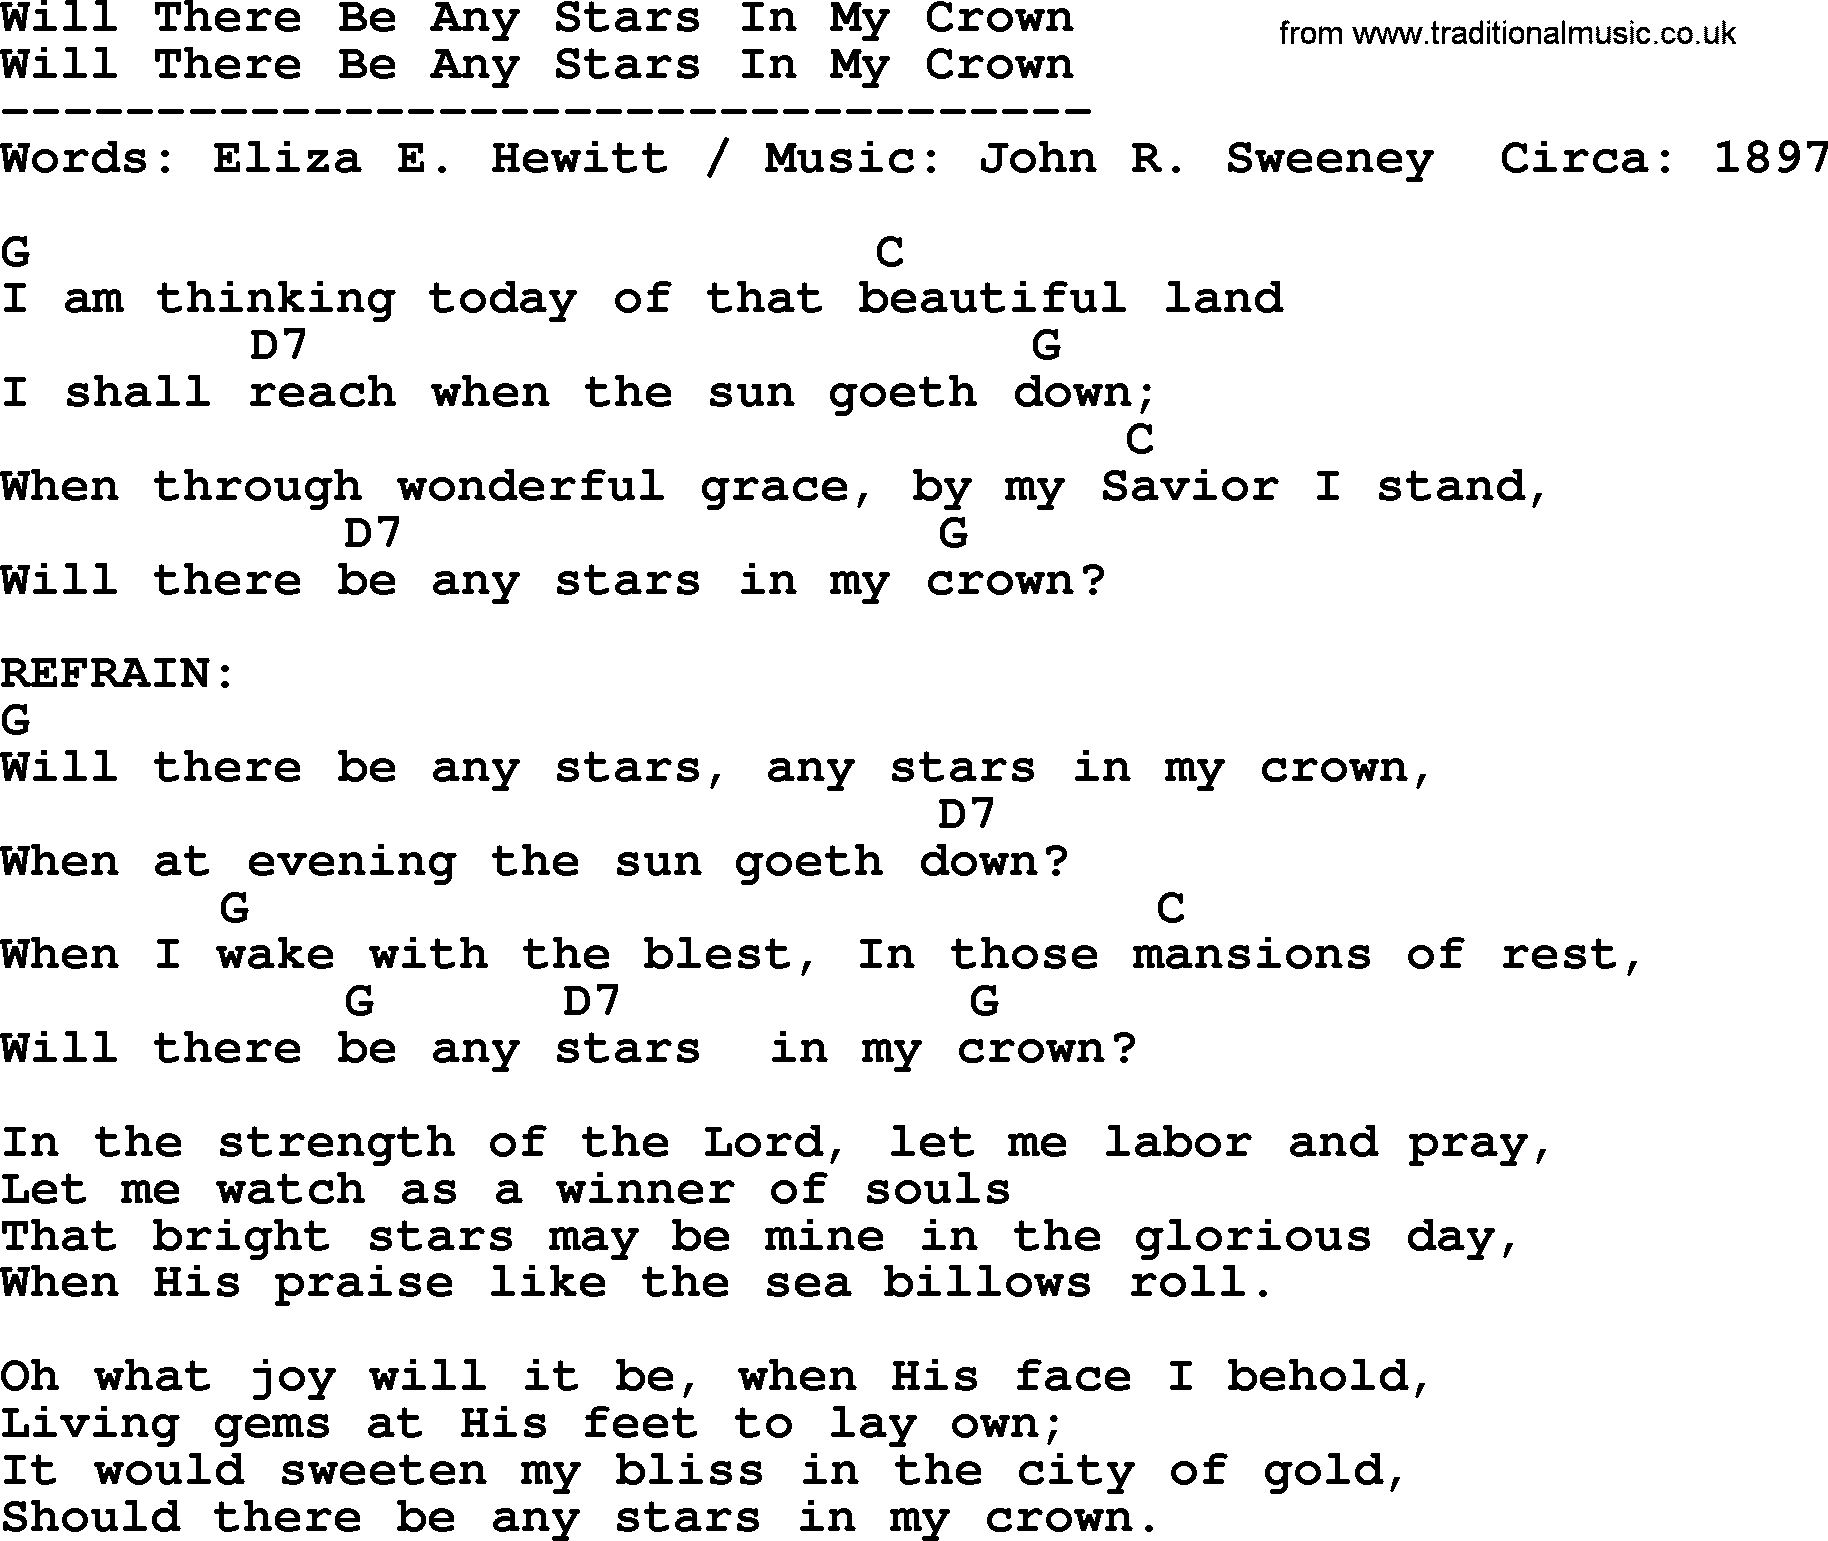 Bluegrass song: Will There Be Any Stars In My Crown, lyrics and chords